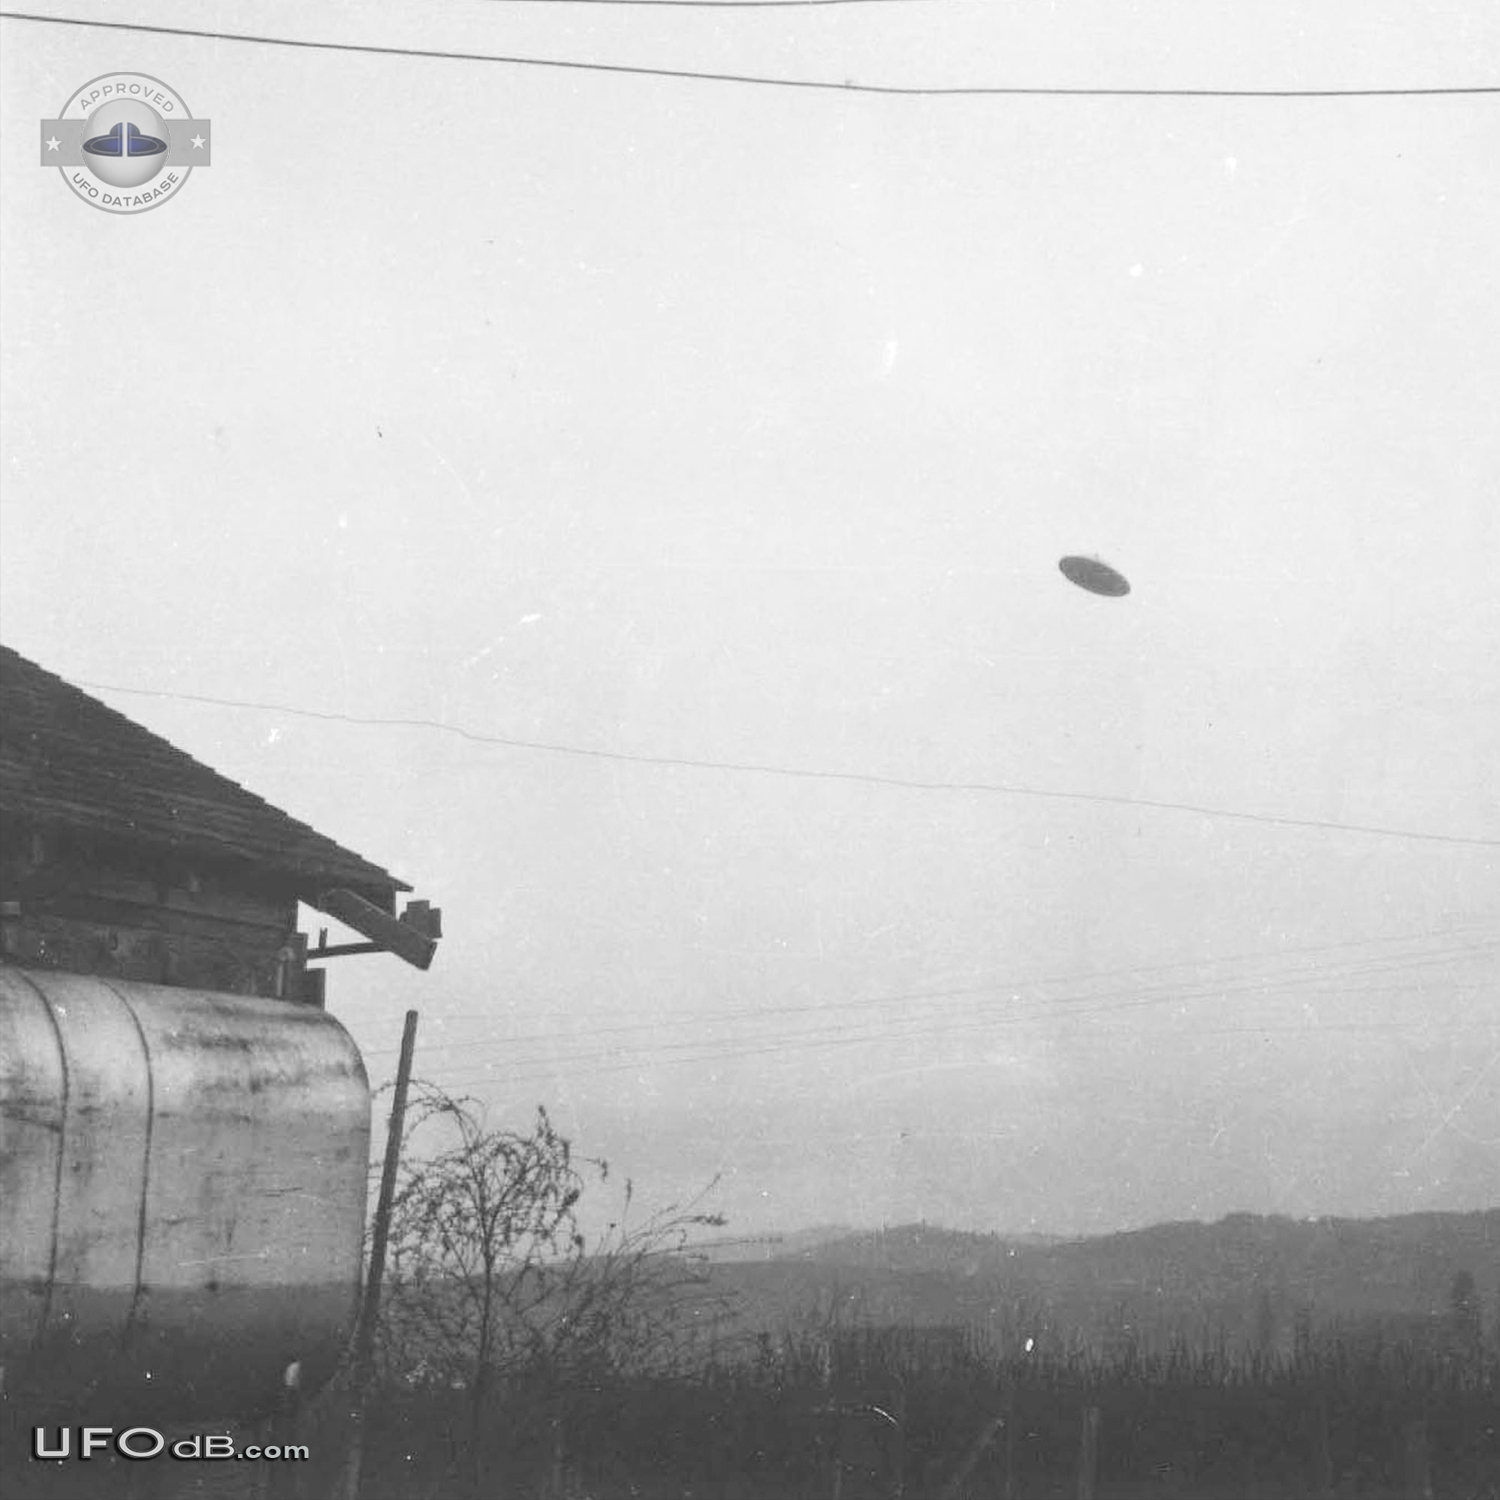 One of the Best UFO picture of all time - 1950 McMinnville, Oregon UFO Picture #423-1